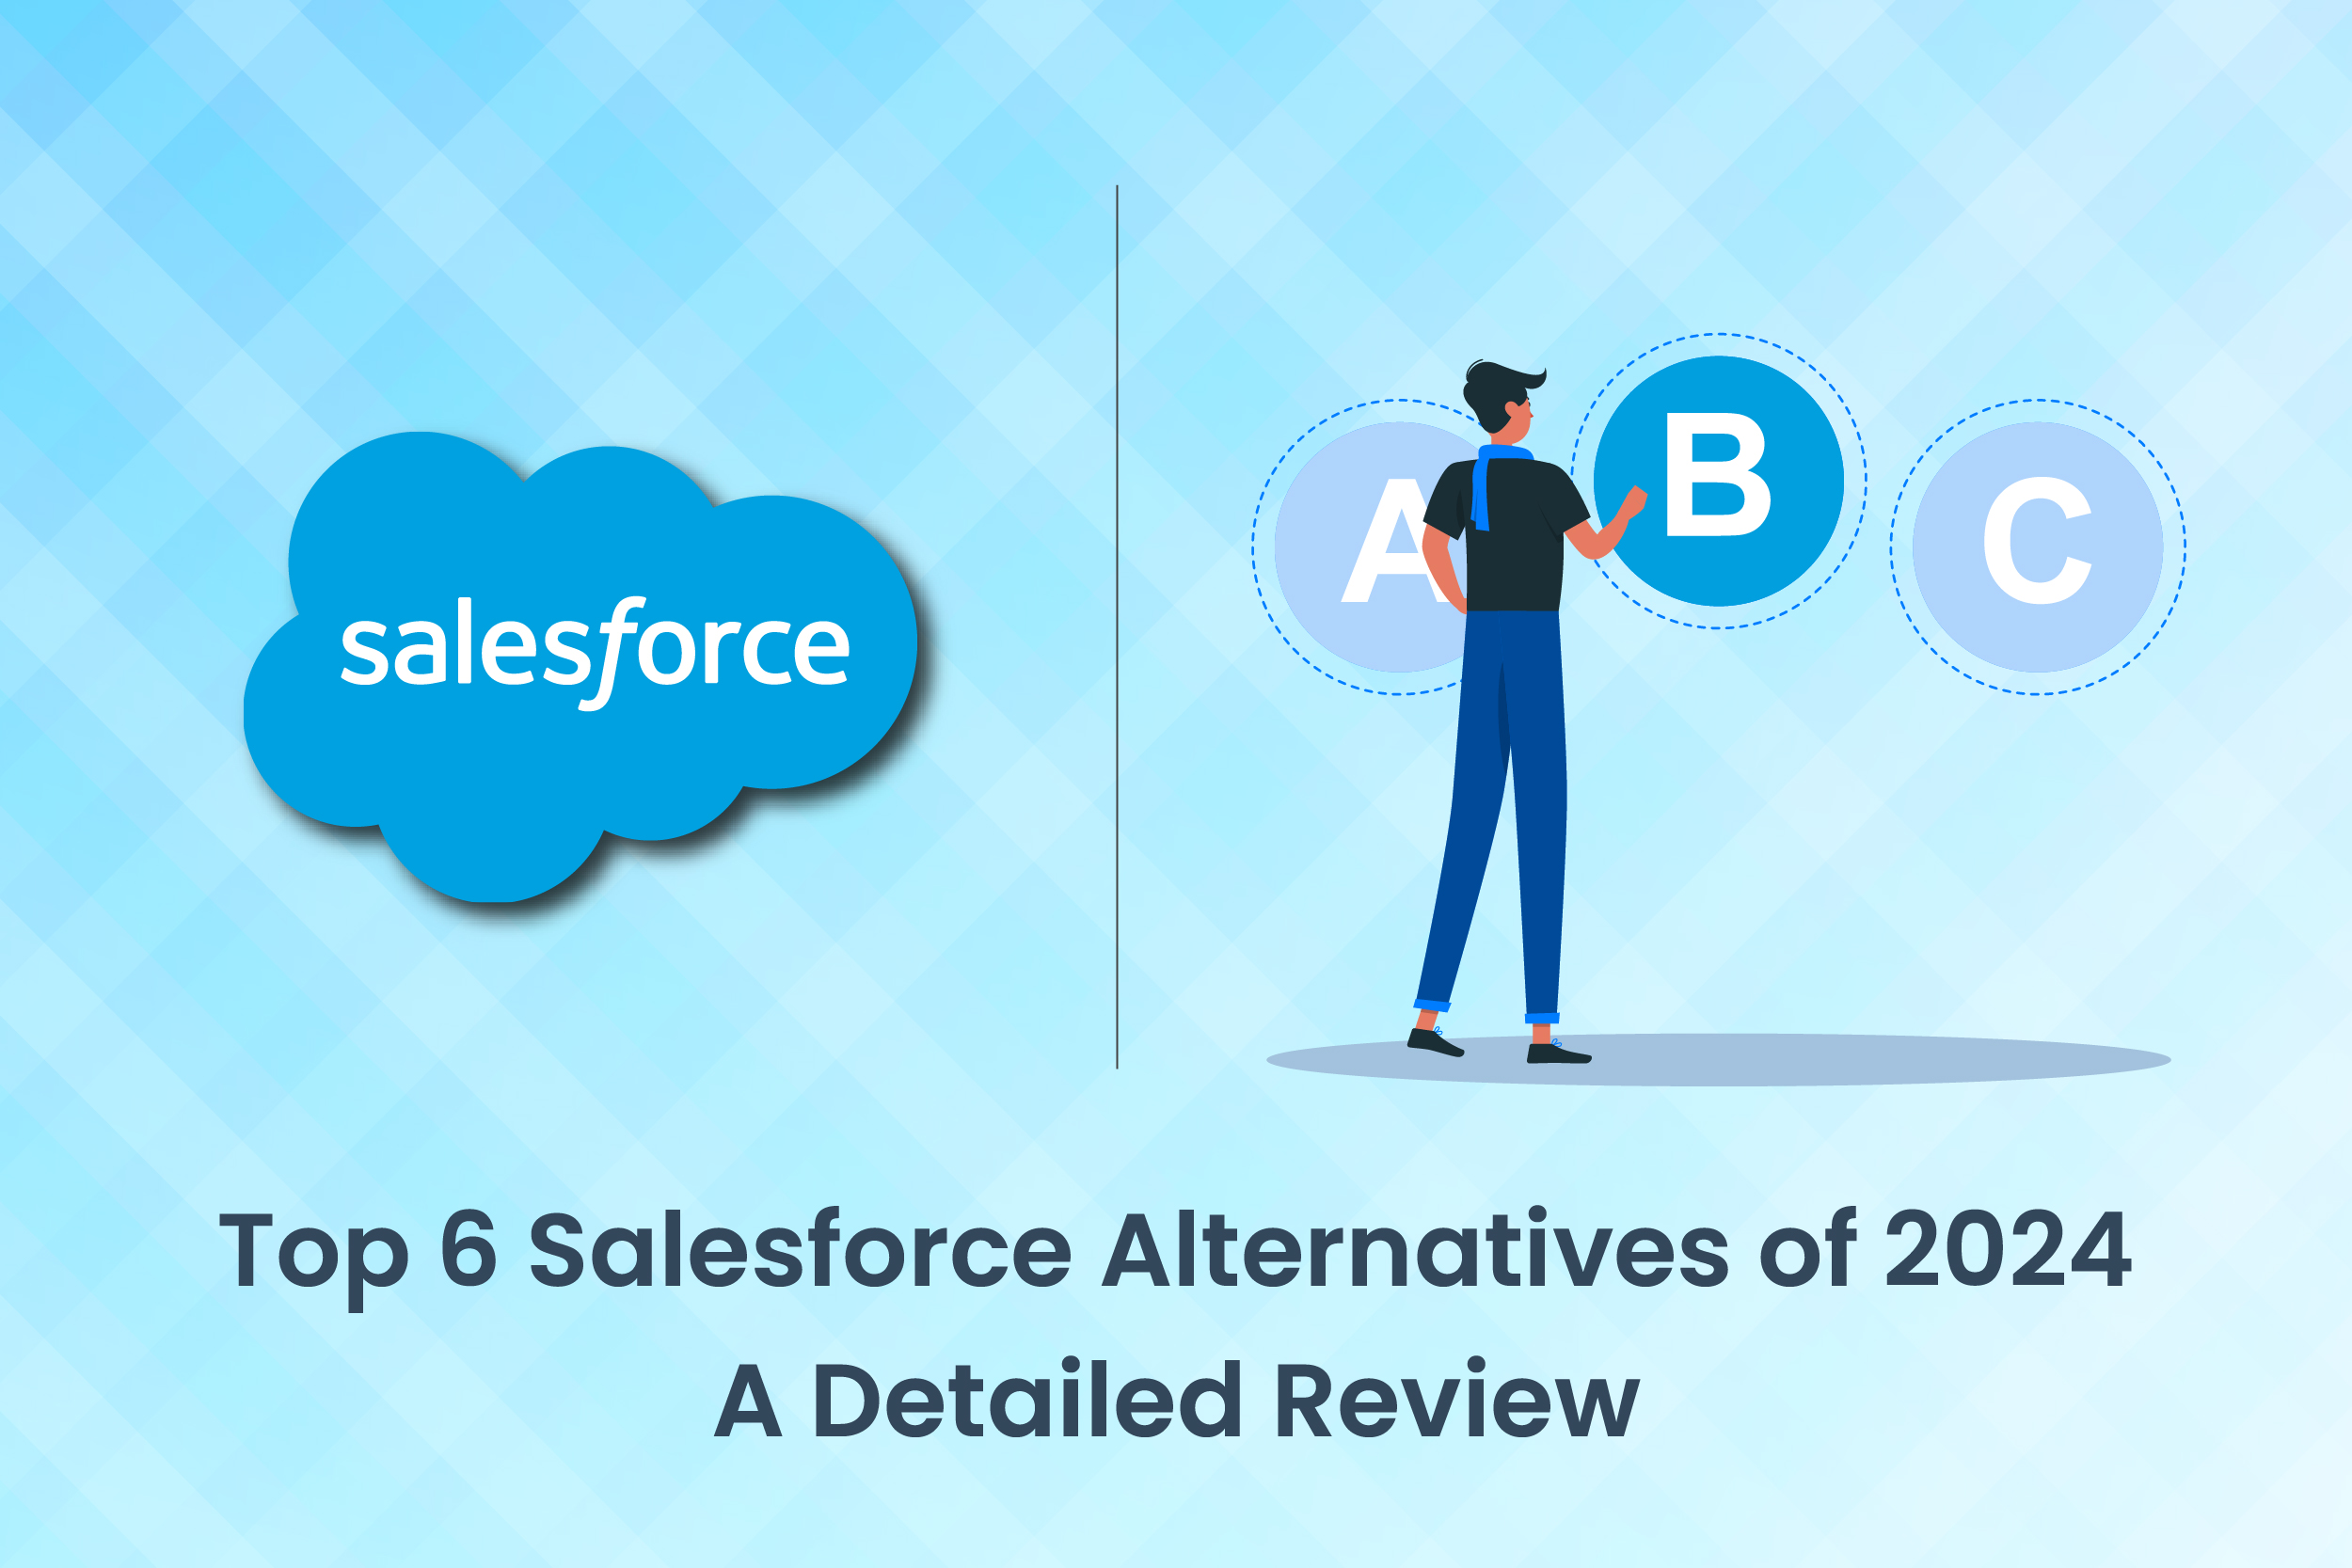 Top 6 Salesforce Alternatives of 2024: A Detailed Review